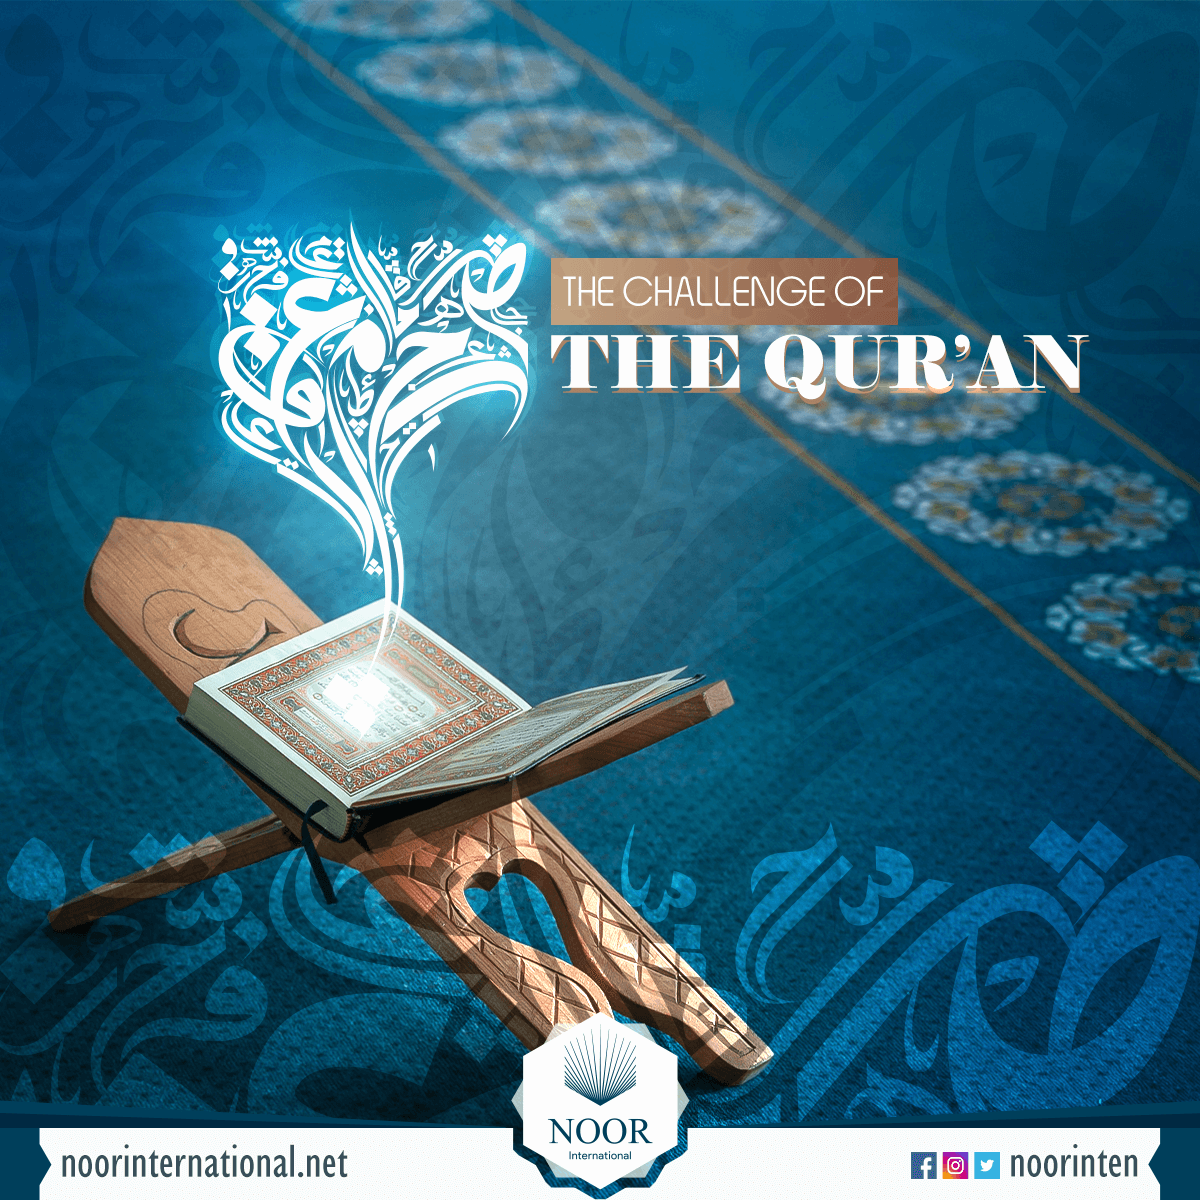 THE CHALLENGE OF THE QUR’AN